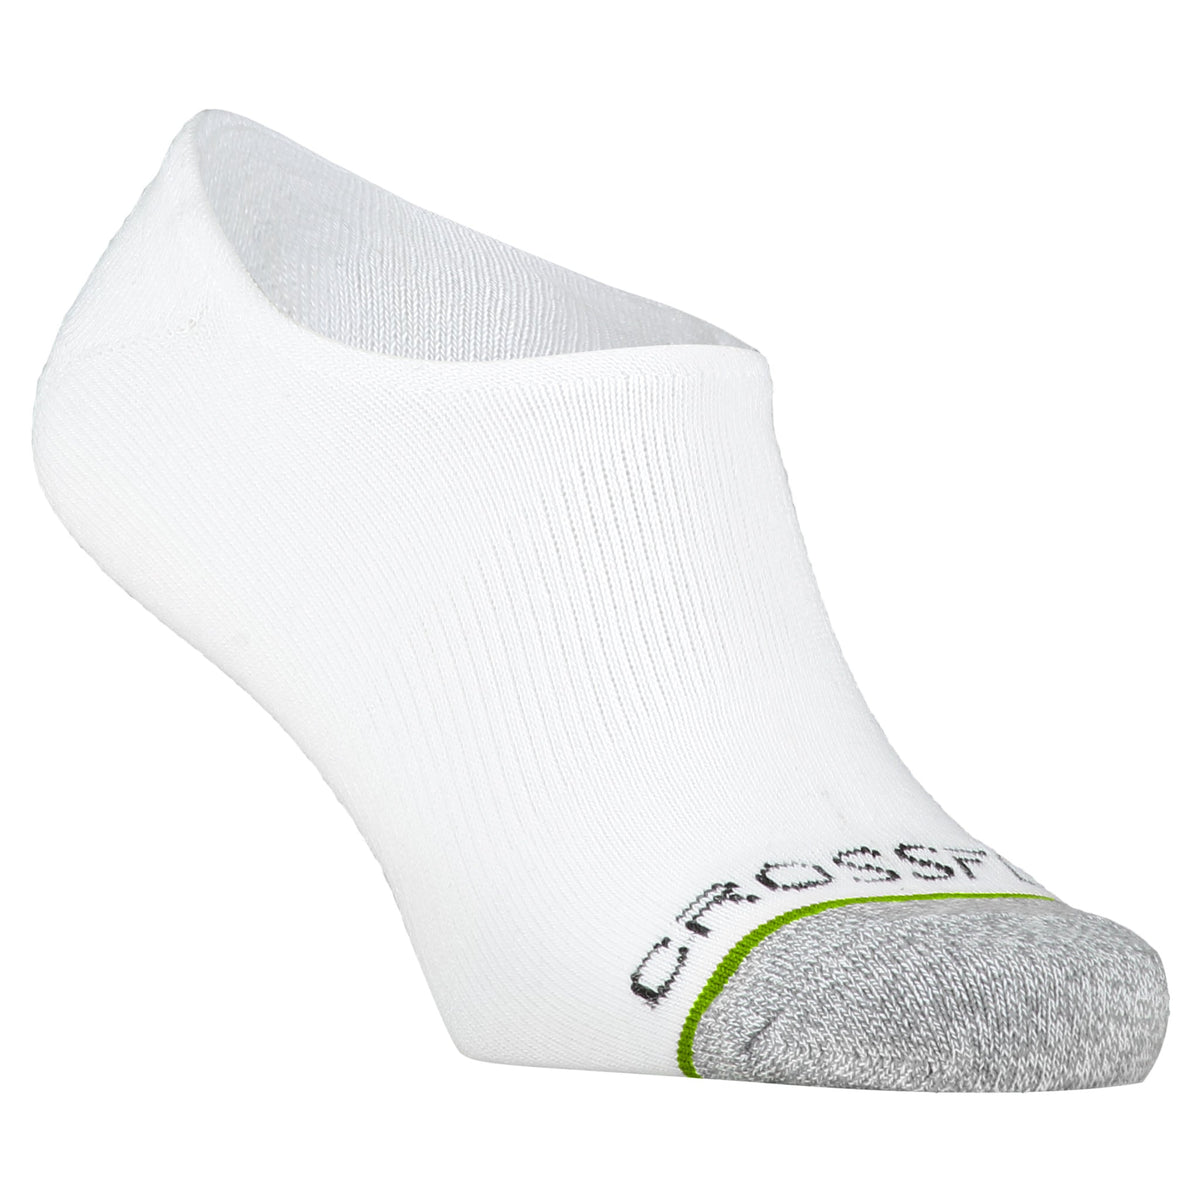 Crossfly men&#39;s Original No Show Socks in white from the Everyday series, featuring Flat Toe Seams and 360 Hold.